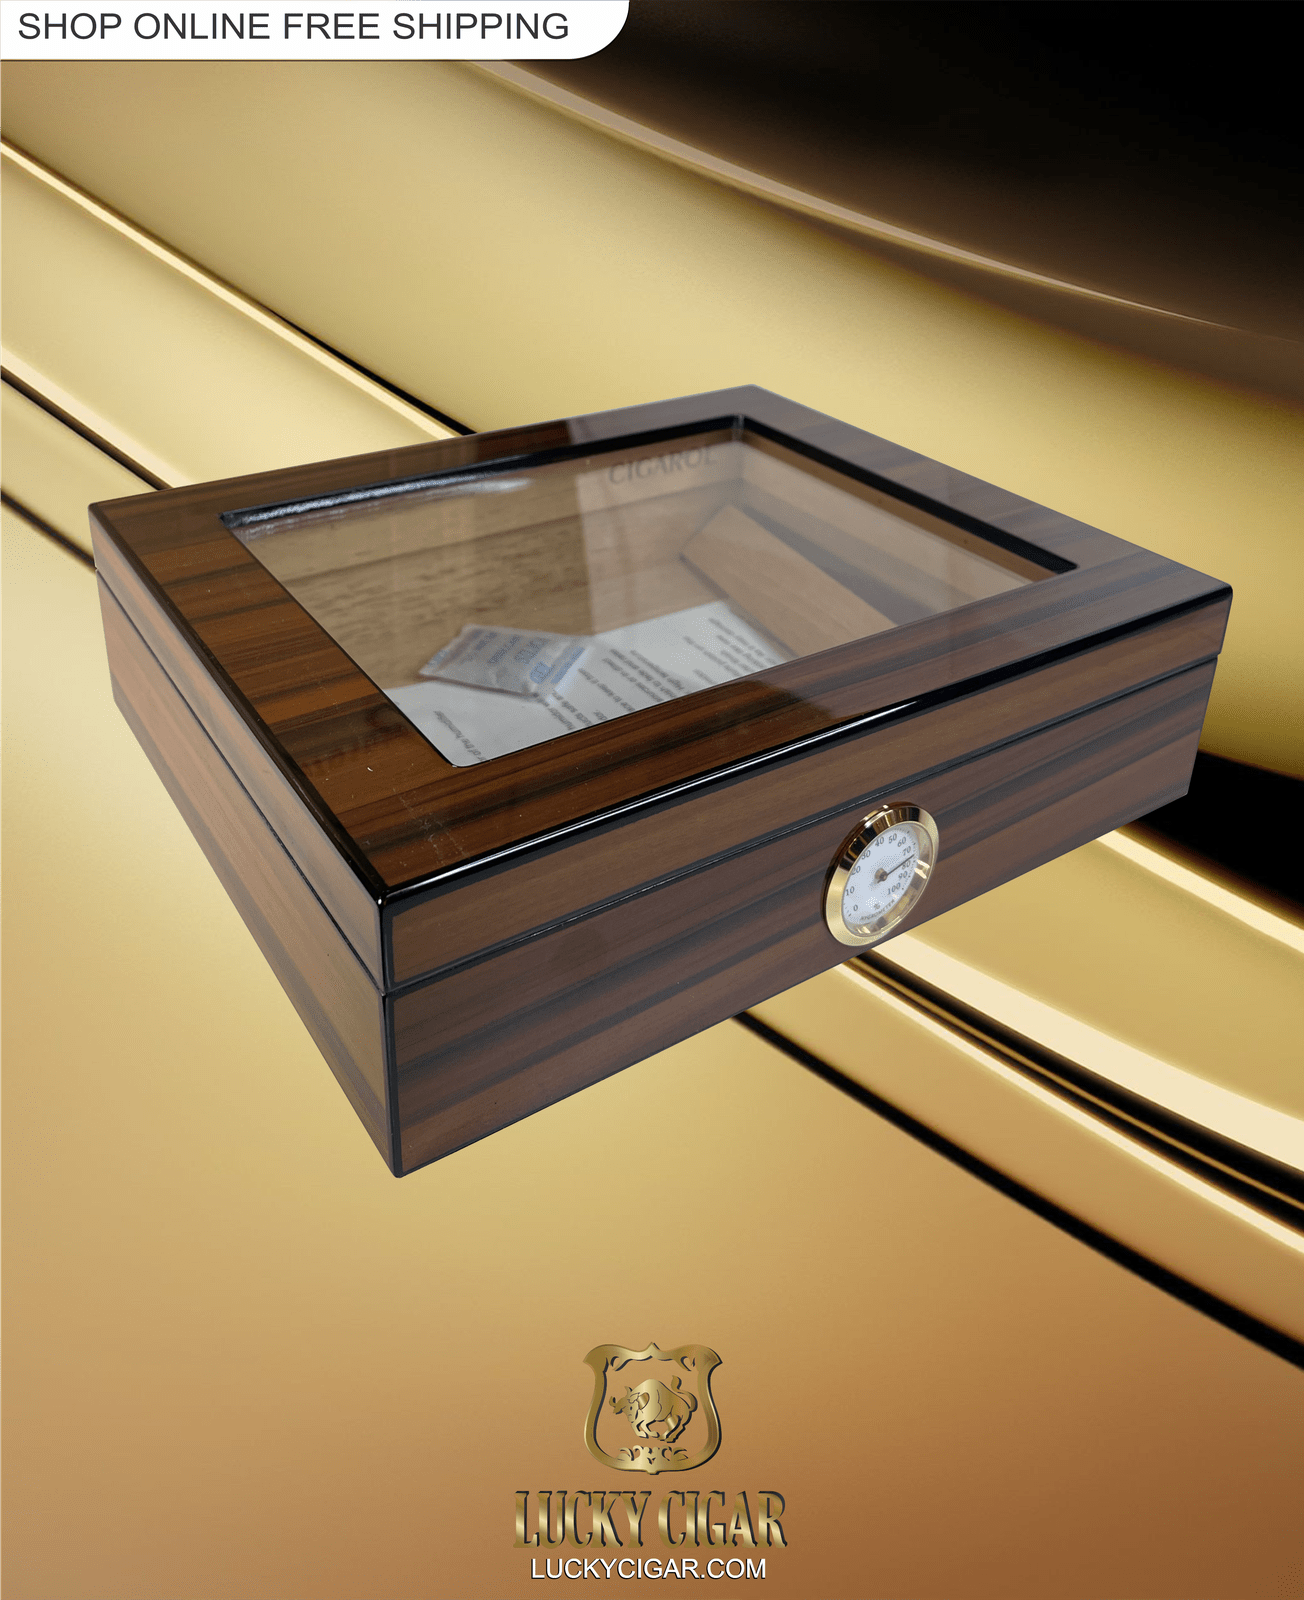 Cigar Lifestyle Accessories: Desk Humidor with Wood Grain and Glass Top